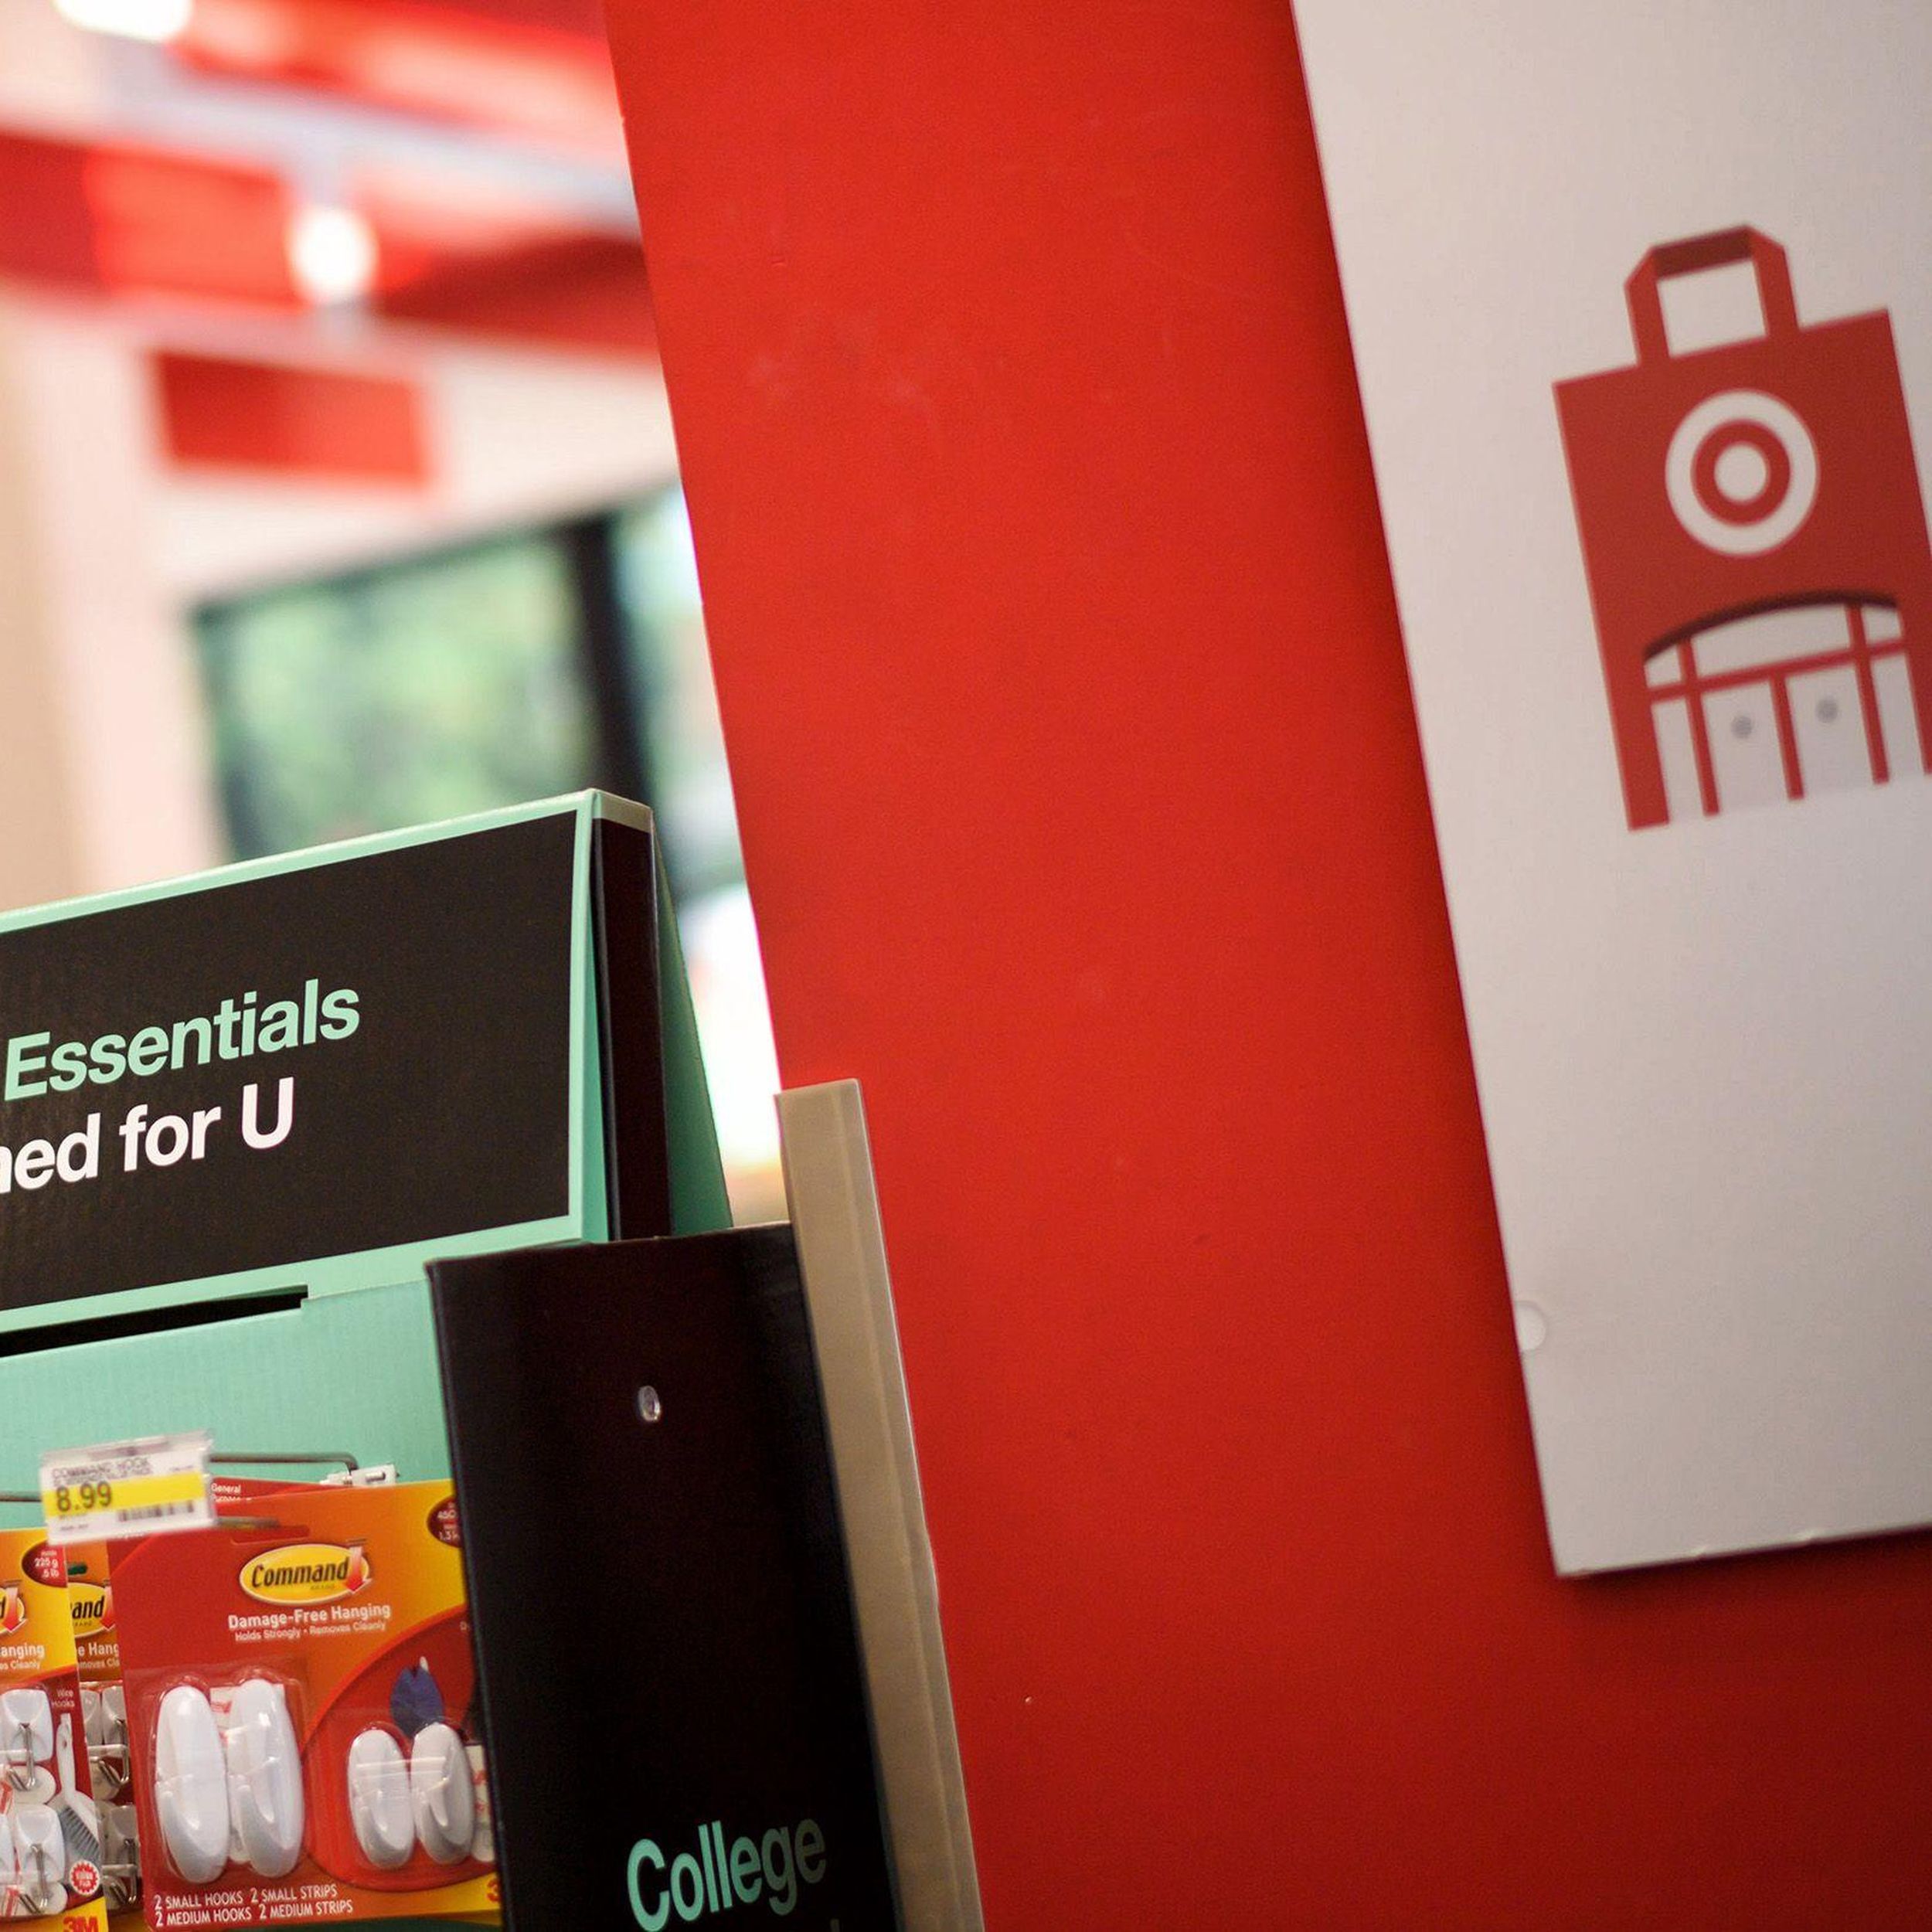 Target steps up its game to court the college crowd